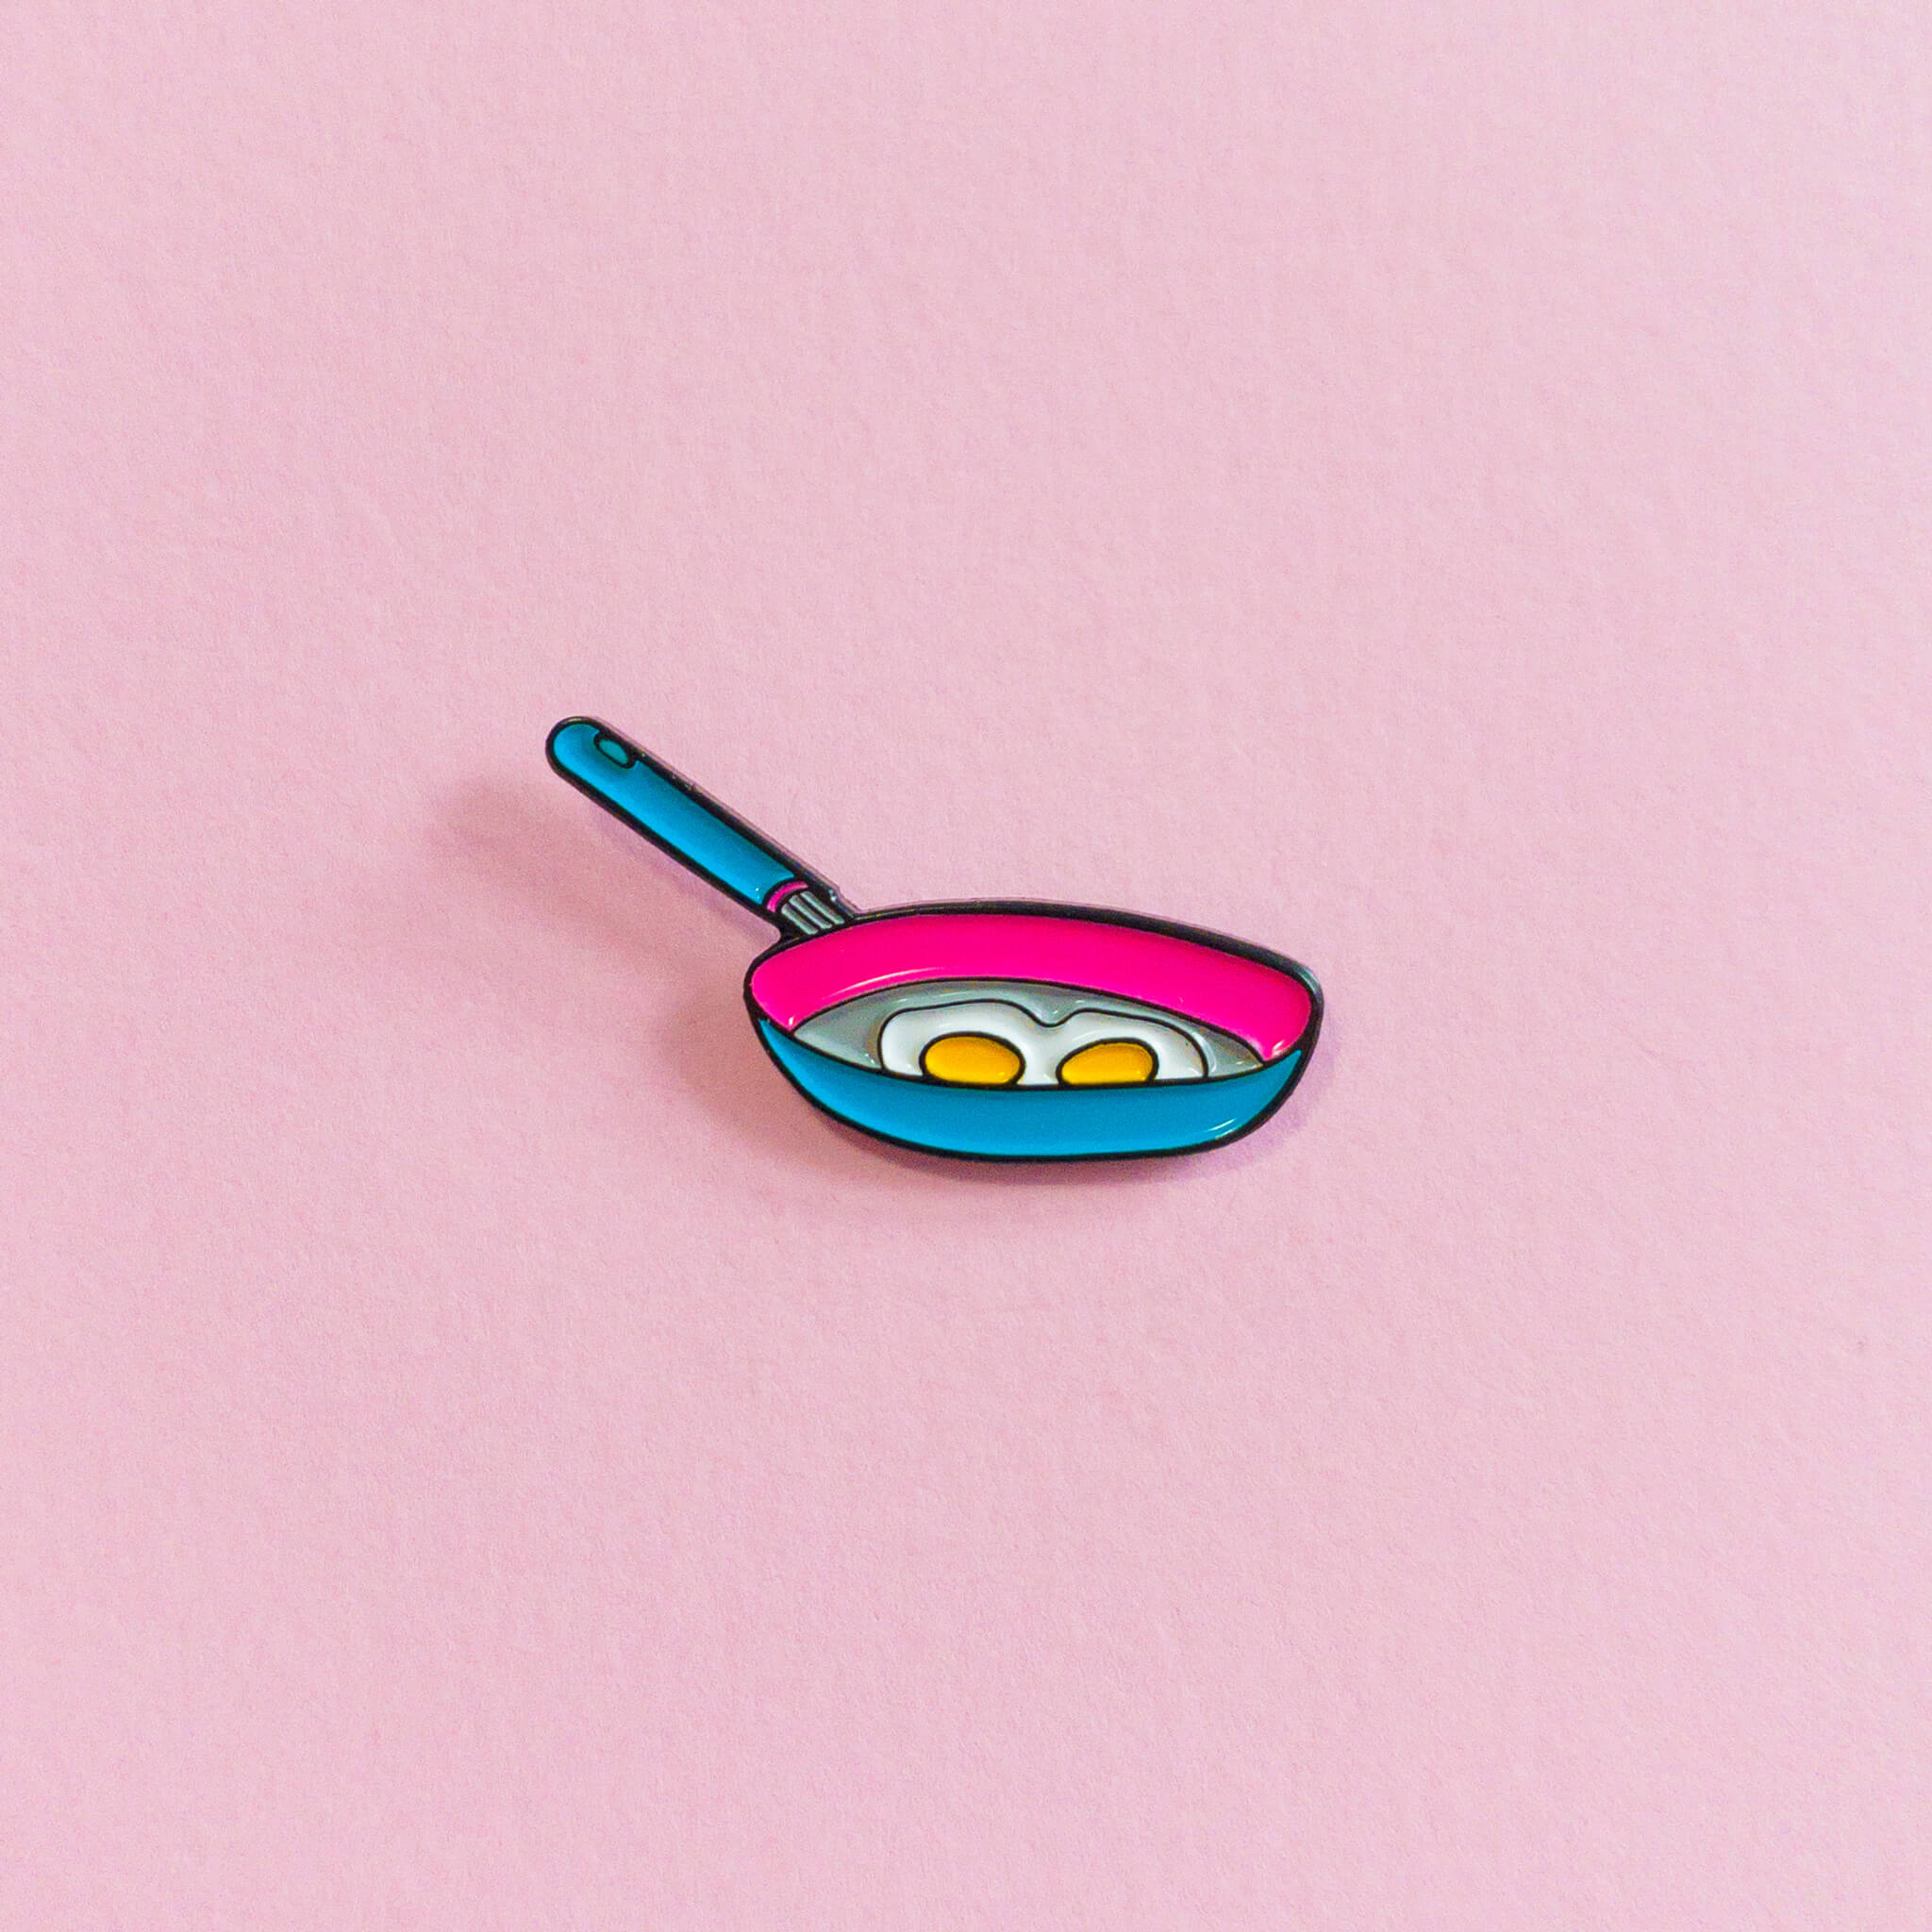 An enamel pin of two eggs frying in a pan, on a pink background. - Pansexual